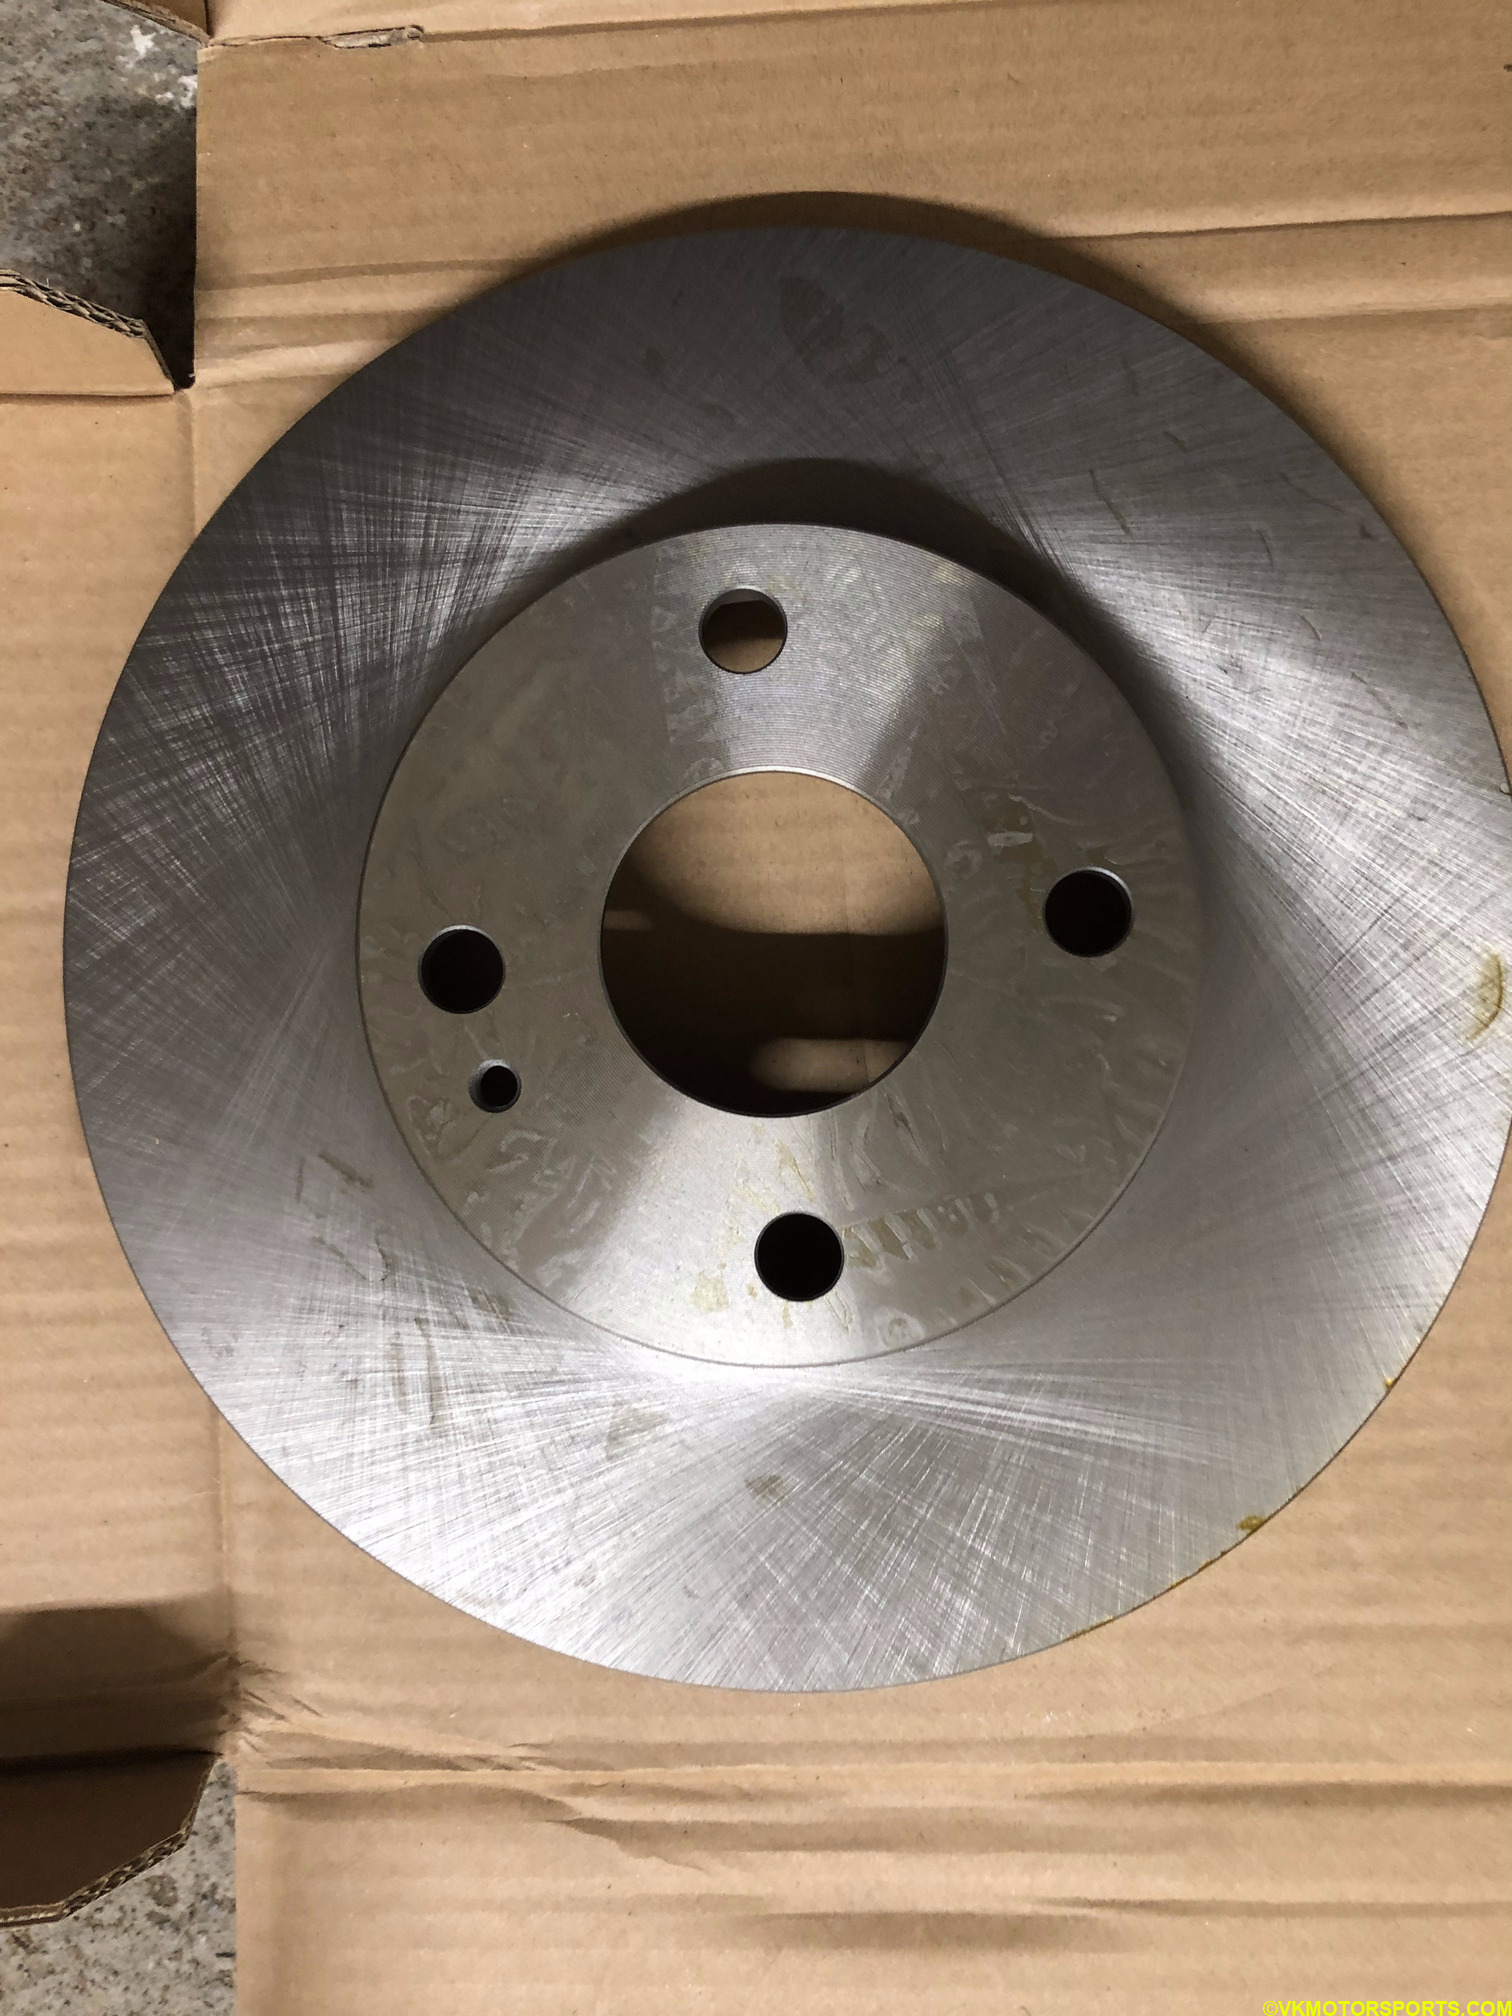 Front rotor unboxed